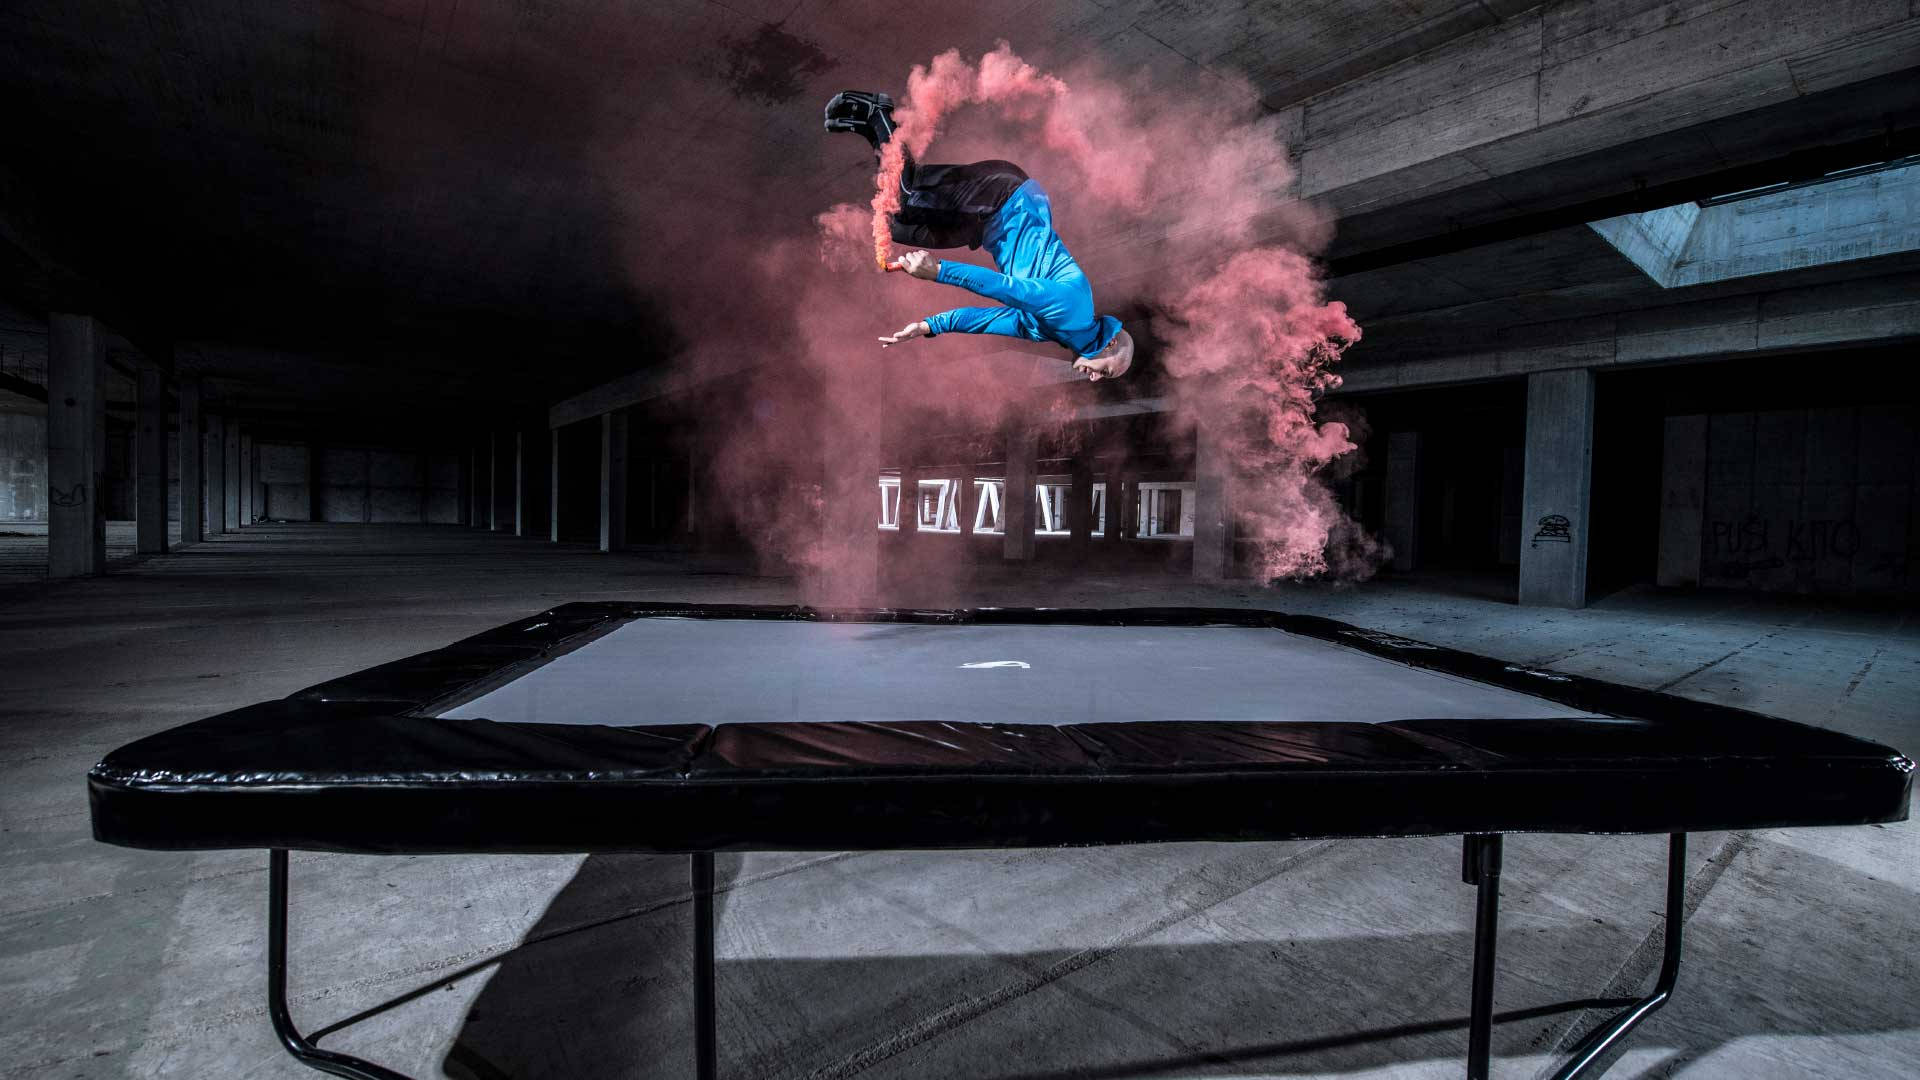 Man Doing An Acrobat On A Trampoline With Smoke Wallpaper